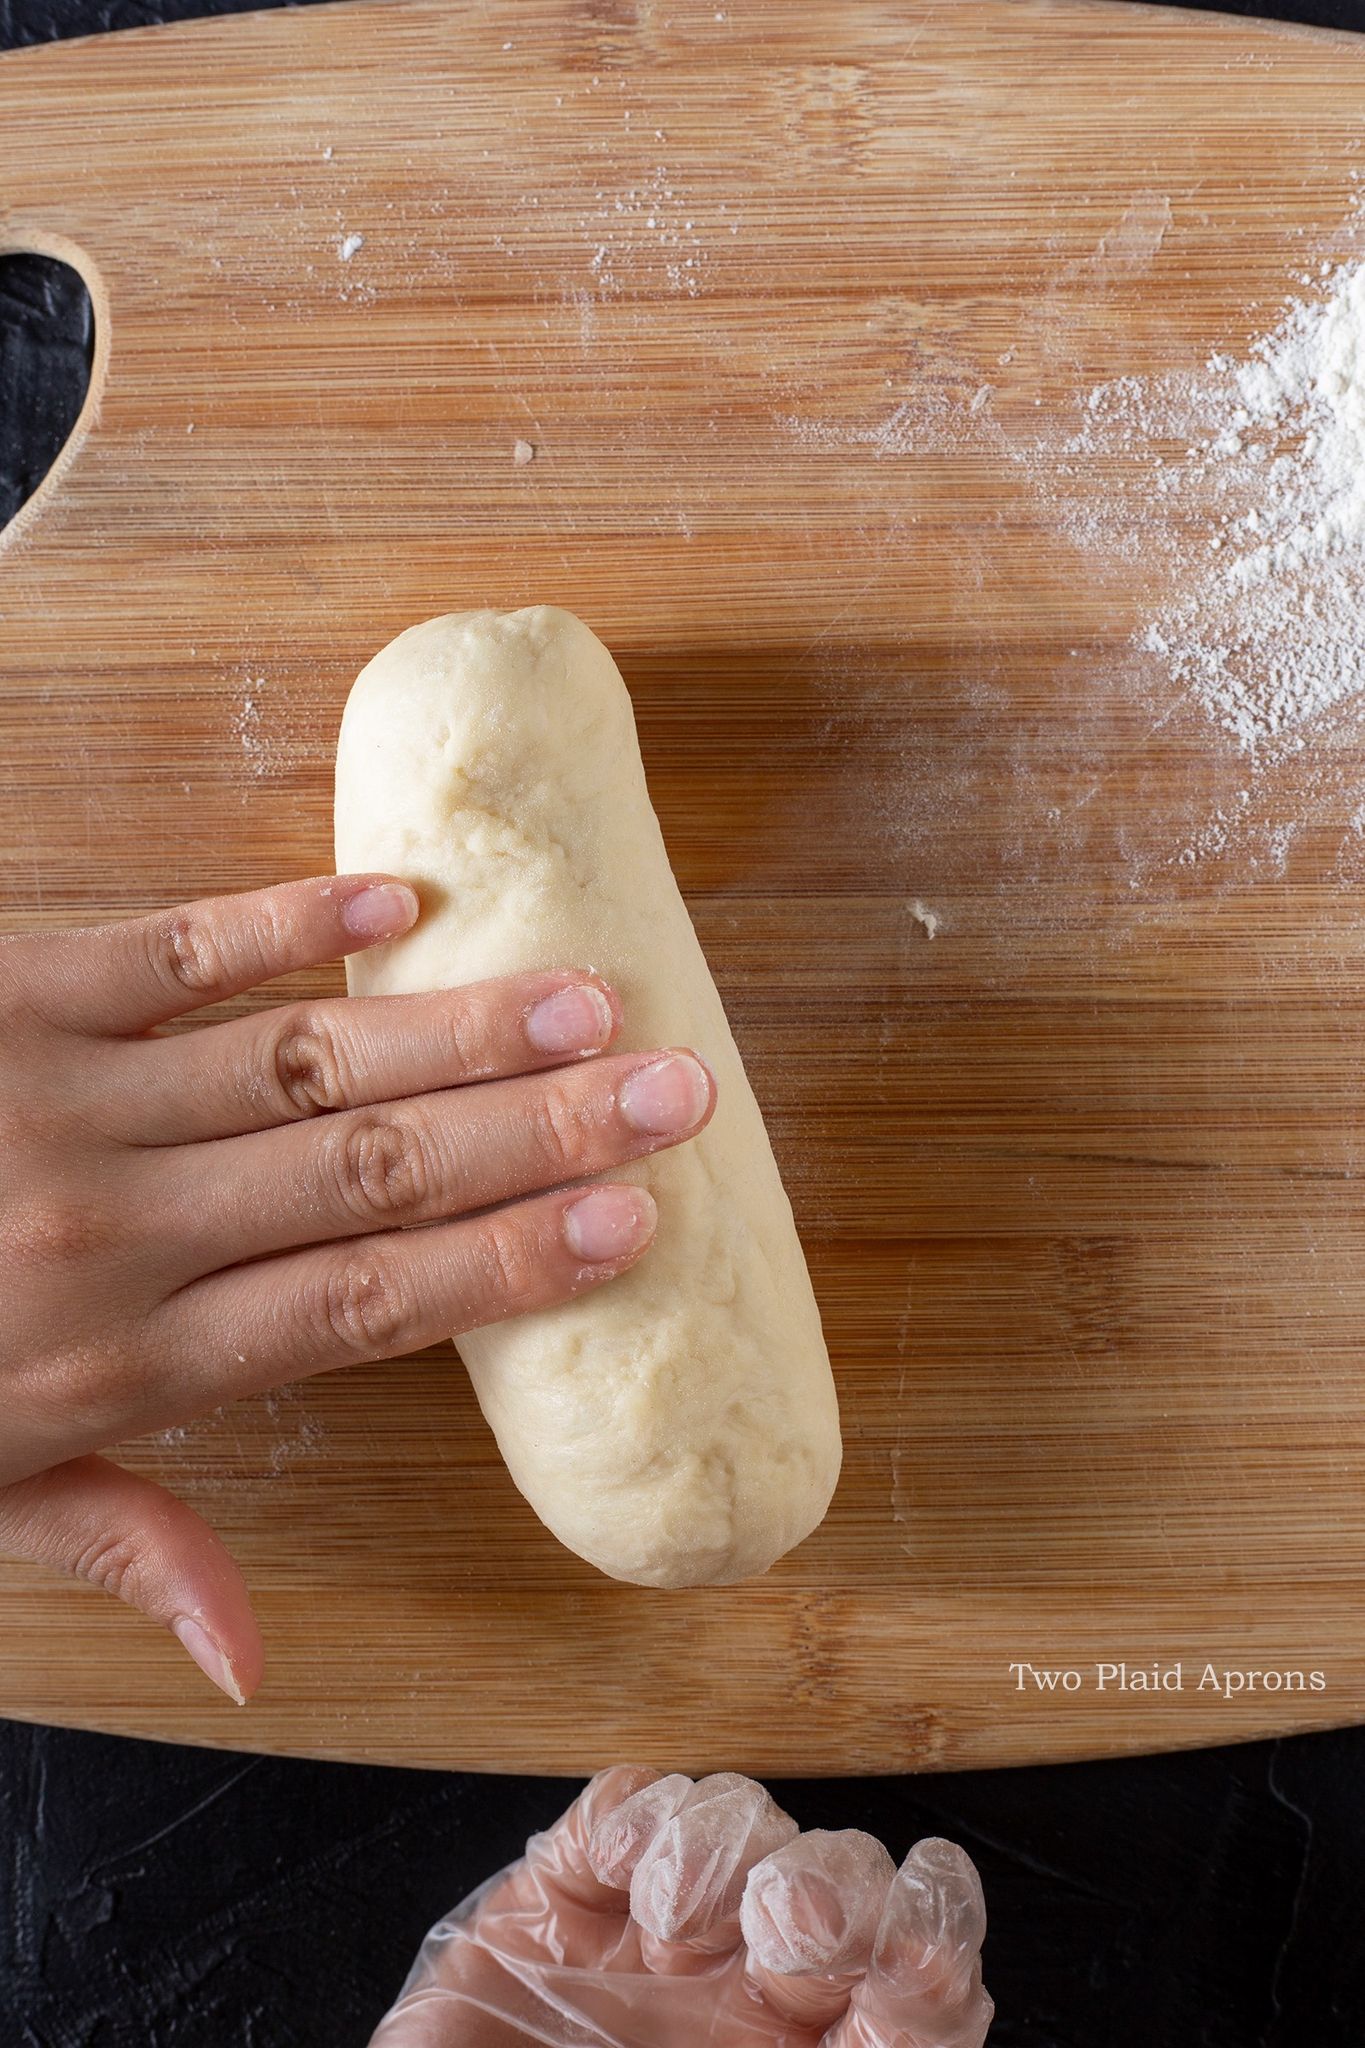 Rolling the dough with sausage in it.